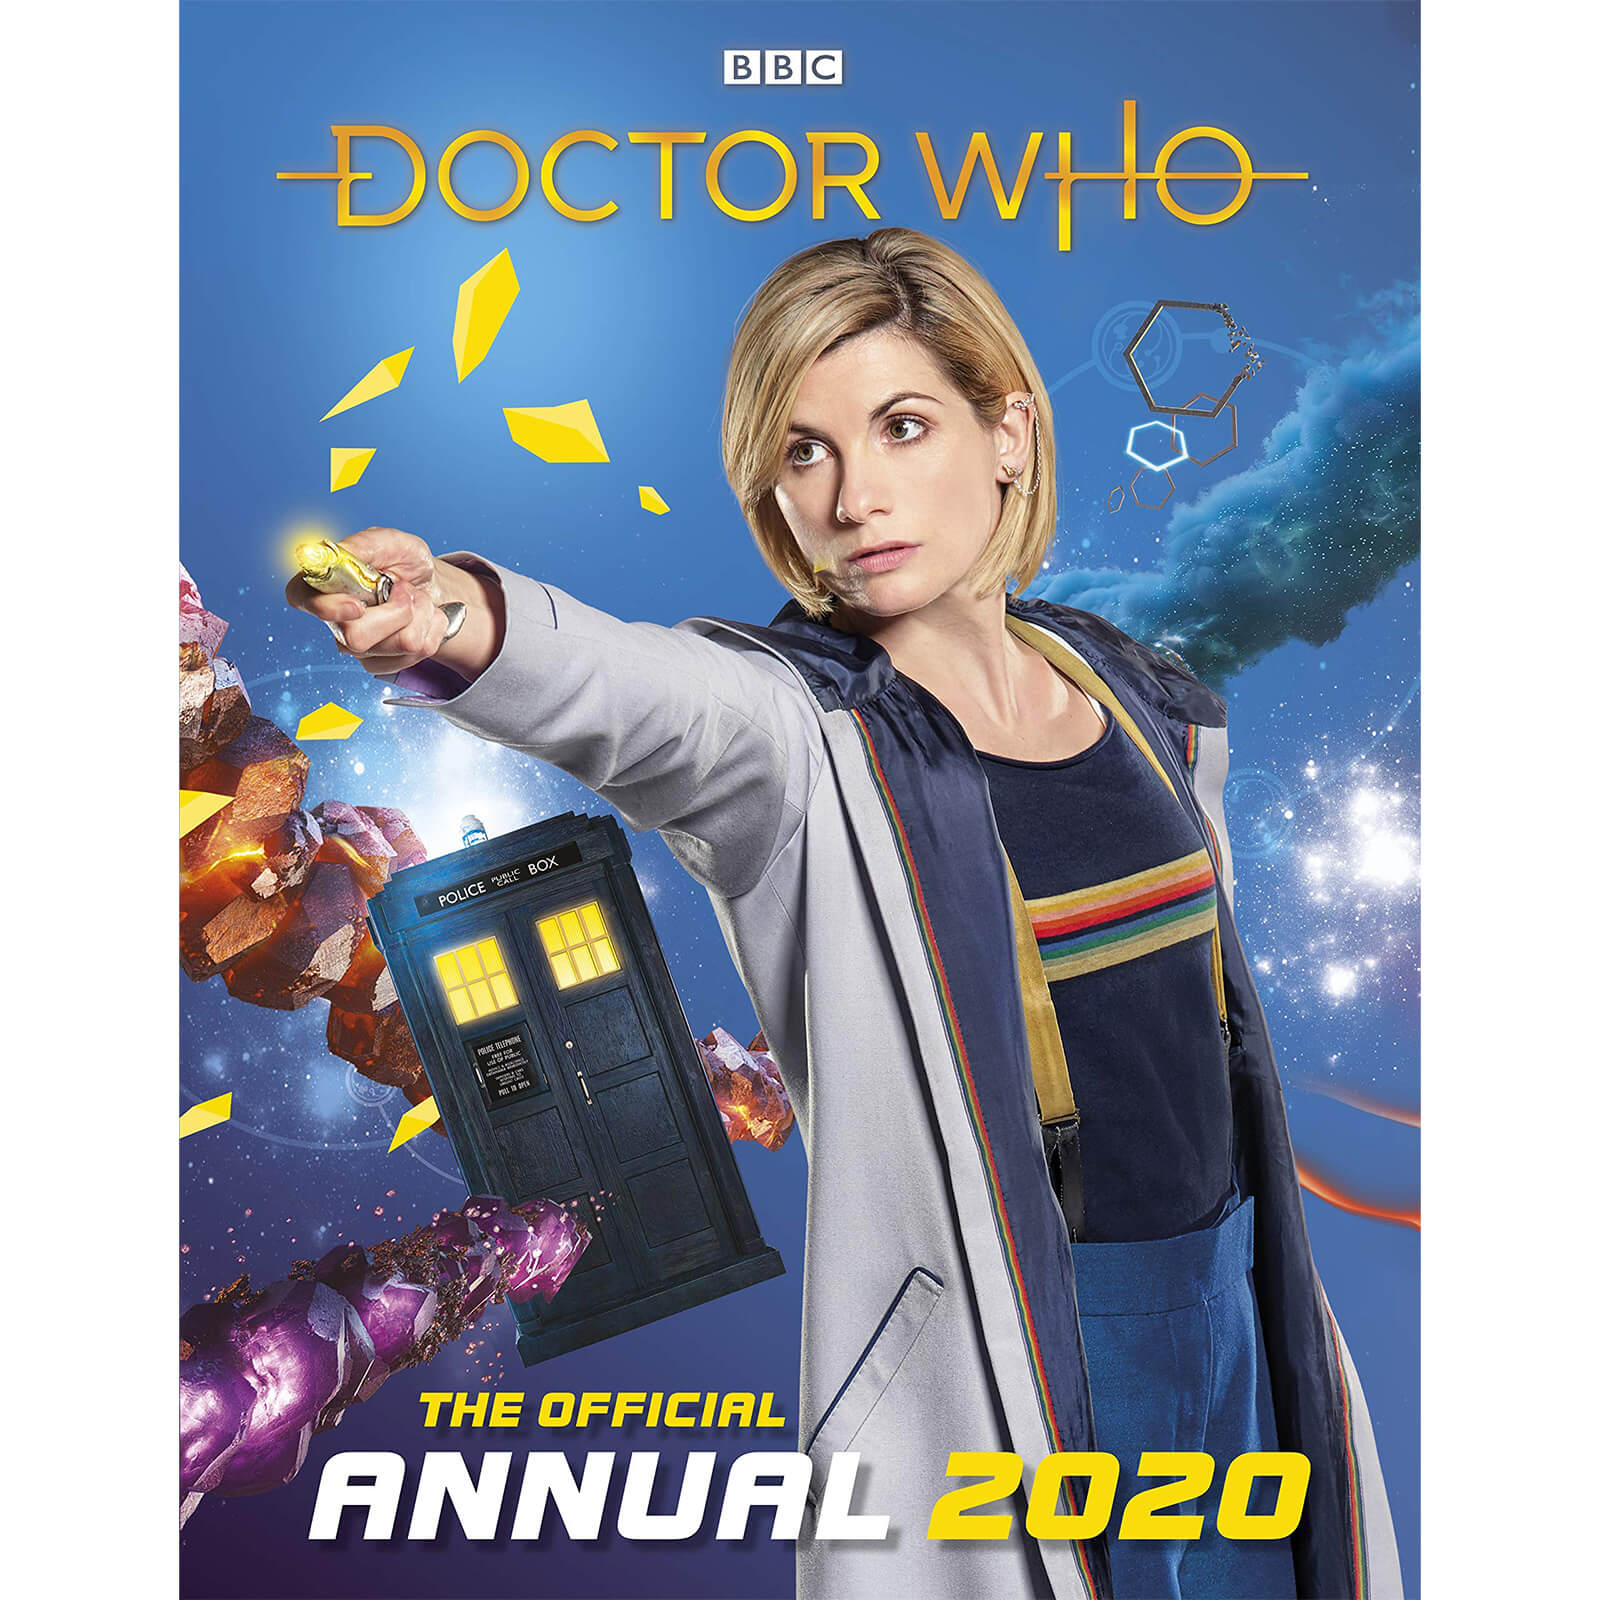 Doctor Who Official Annual 2020 Hard Cover Graphic Novel